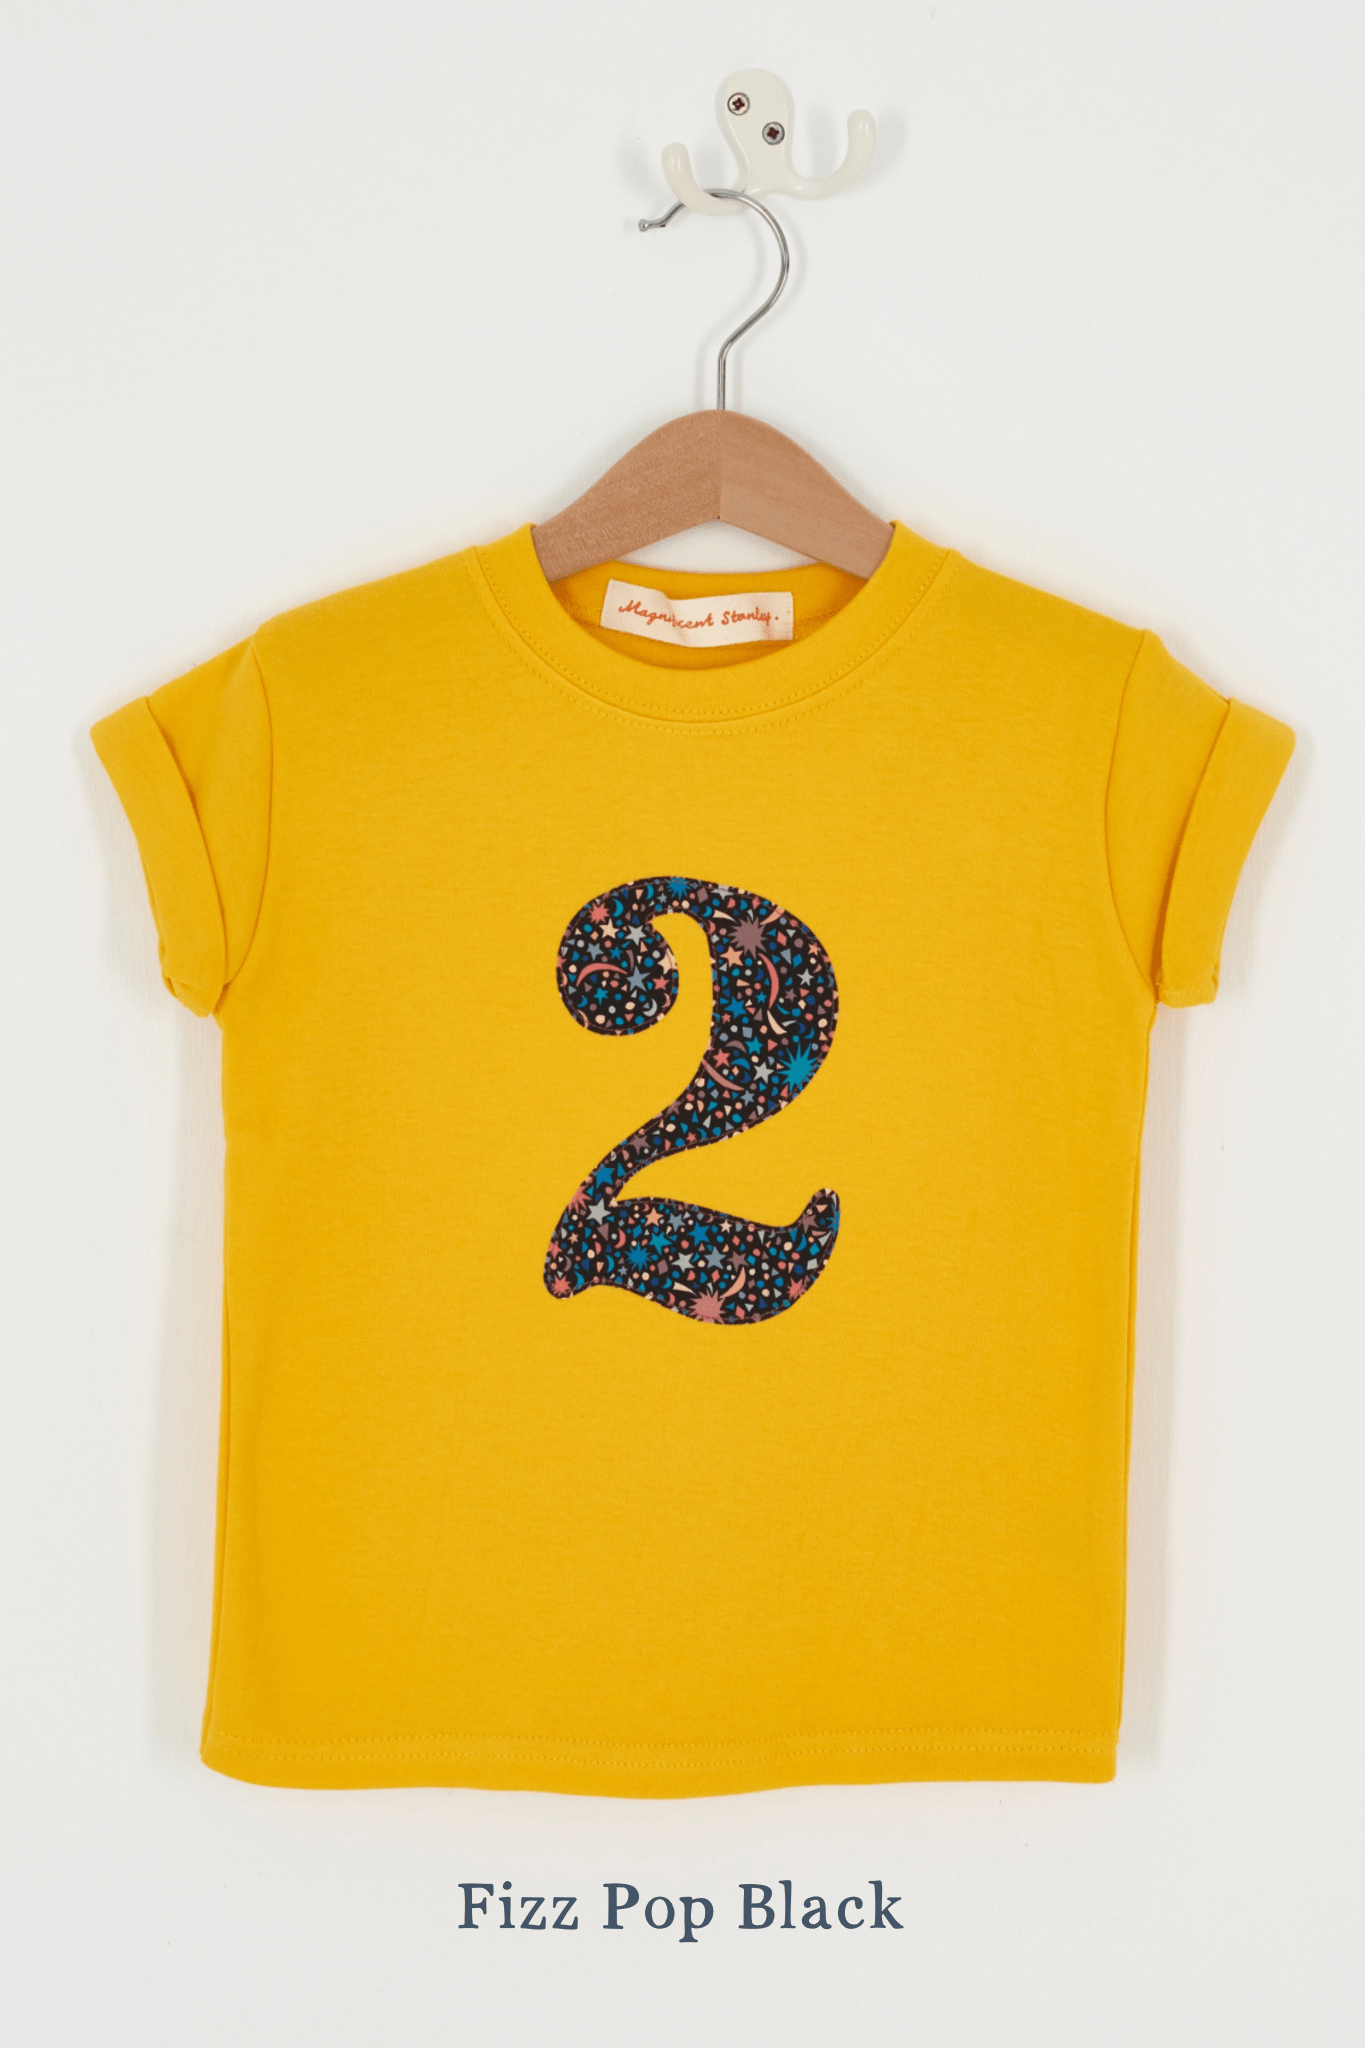 Magnificent Stanley Tee CREATE YOUR OWN Personalised or Age Yellow Liberty Print T-Shirt